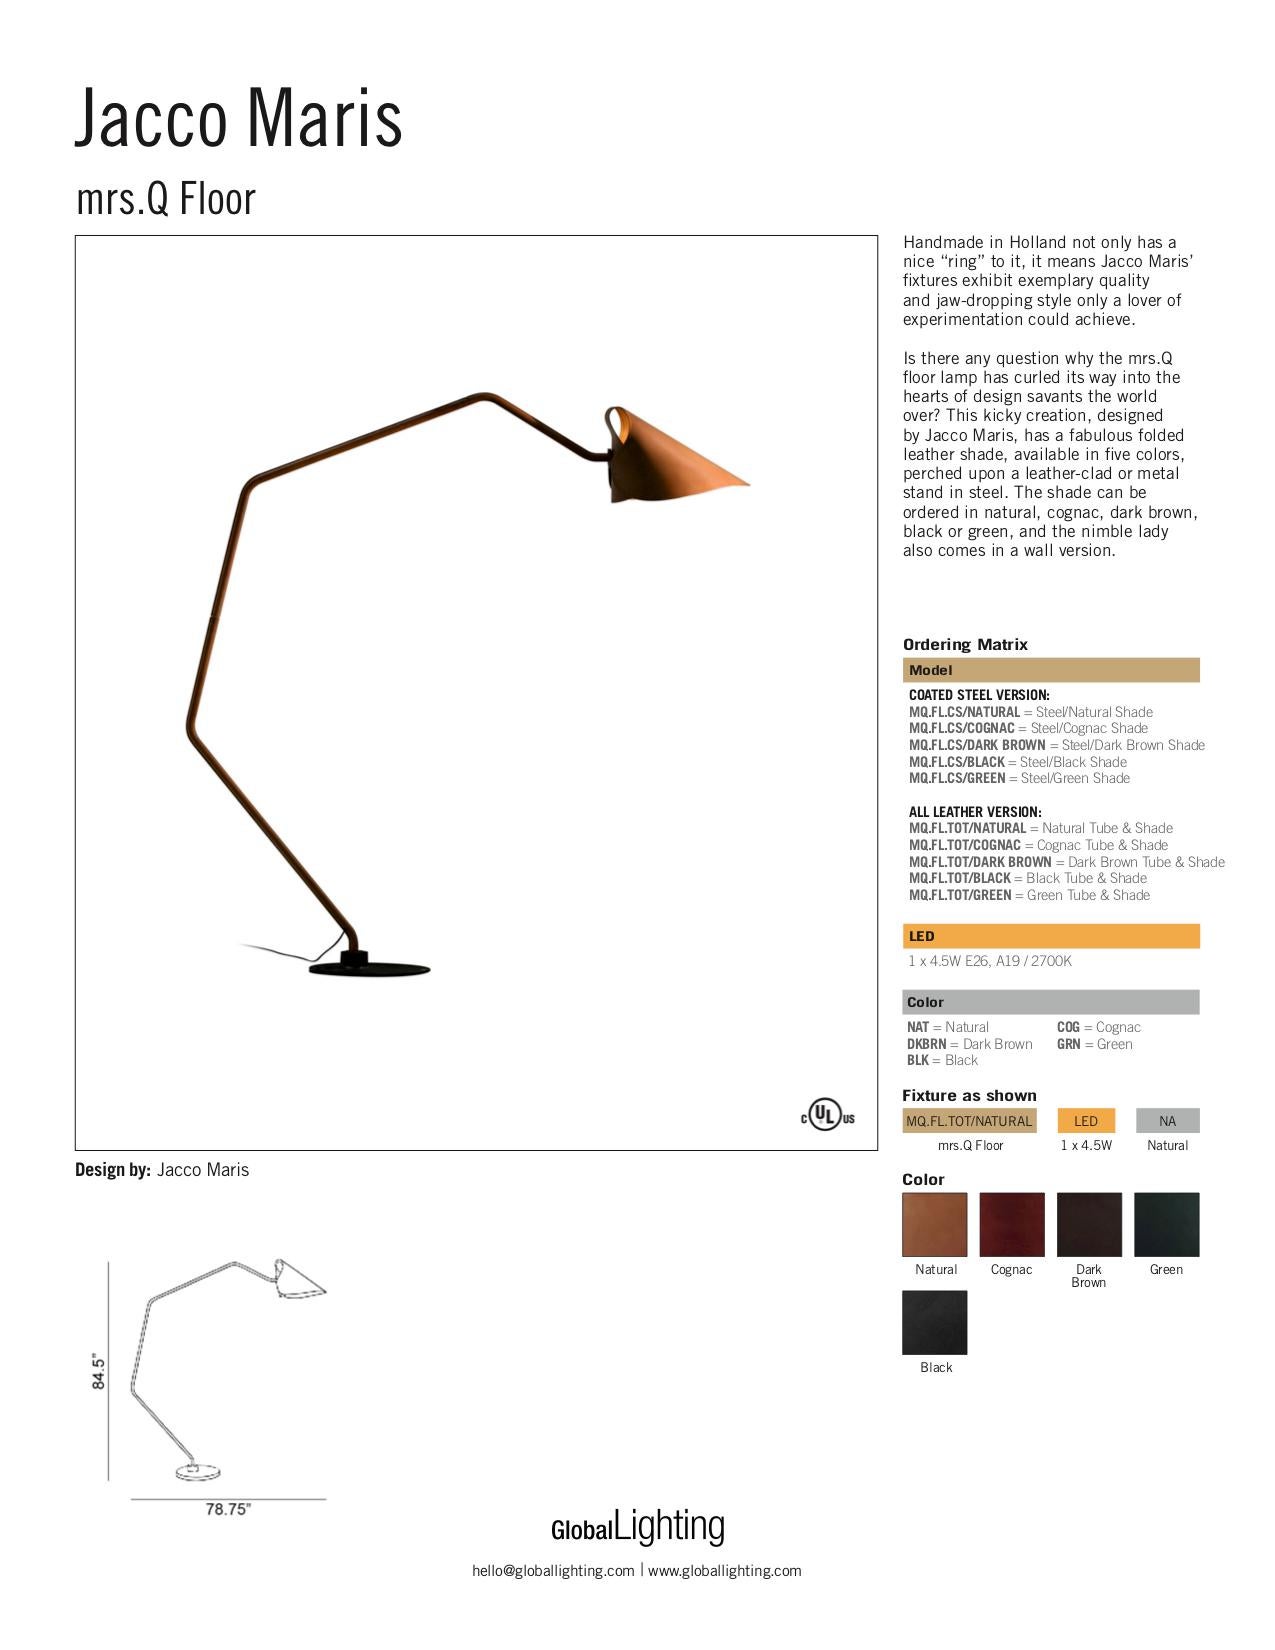 Dutch Jacco Maris Mrs. Q Floor Lamp in Full Leather & Natural Shade - 1stdibs New York For Sale